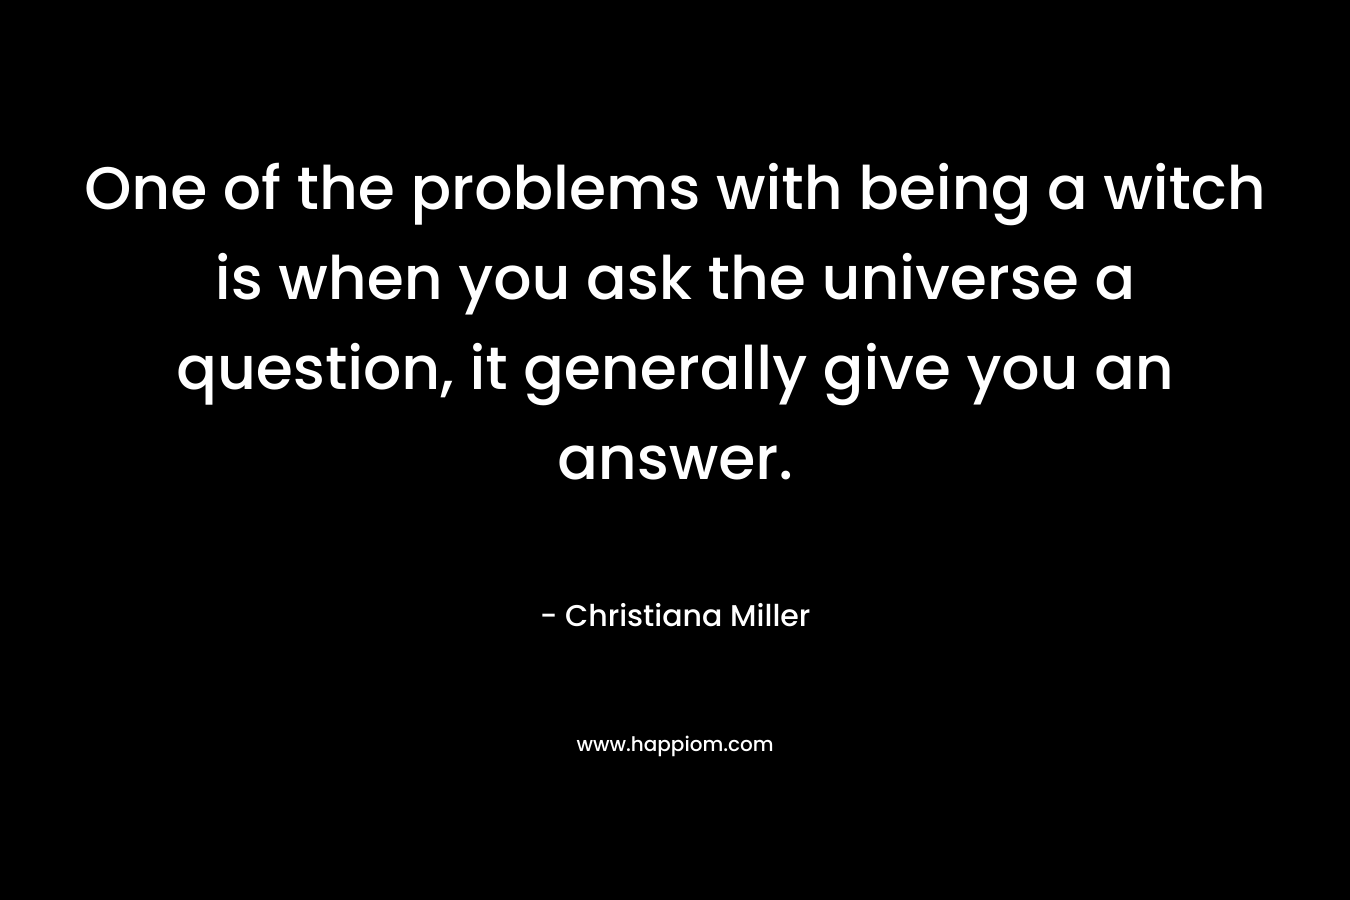 One of the problems with being a witch is when you ask the universe a question, it generally give you an answer.